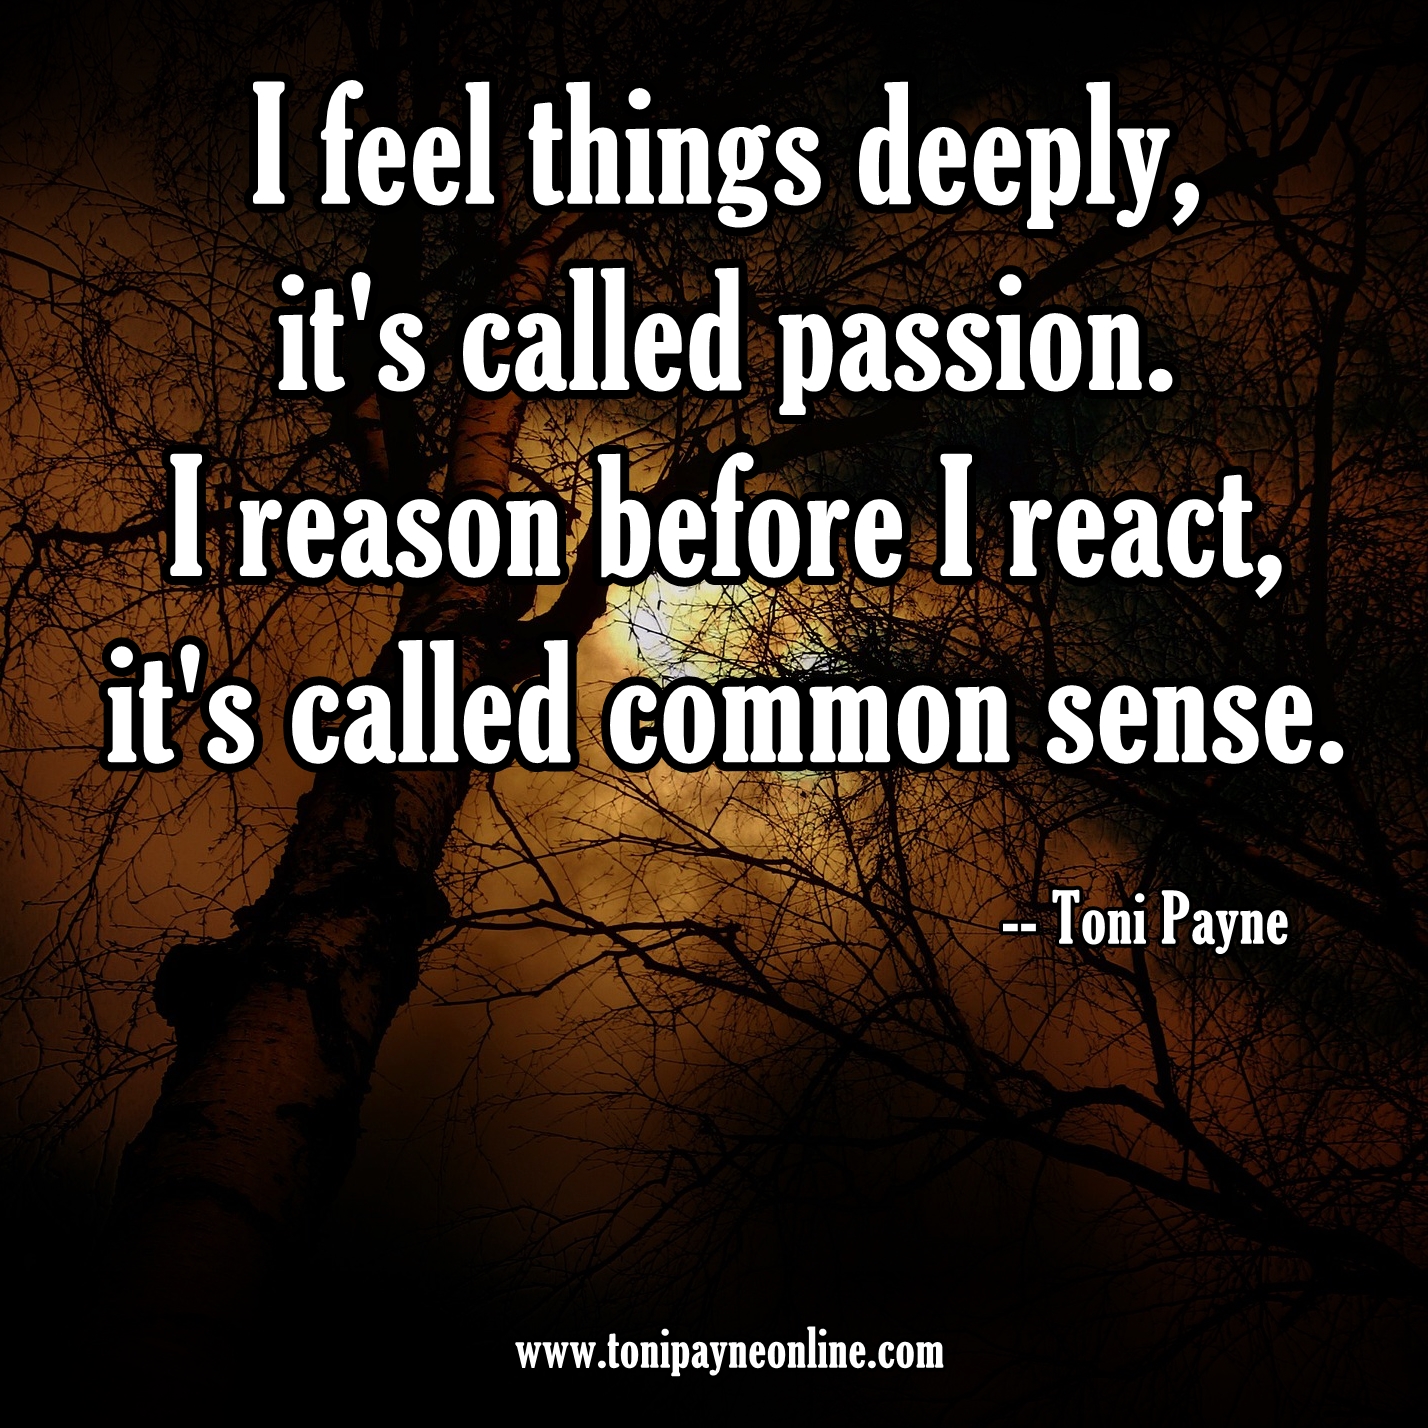 Picture Quote About Passion and Common Sense – I feel things deeply